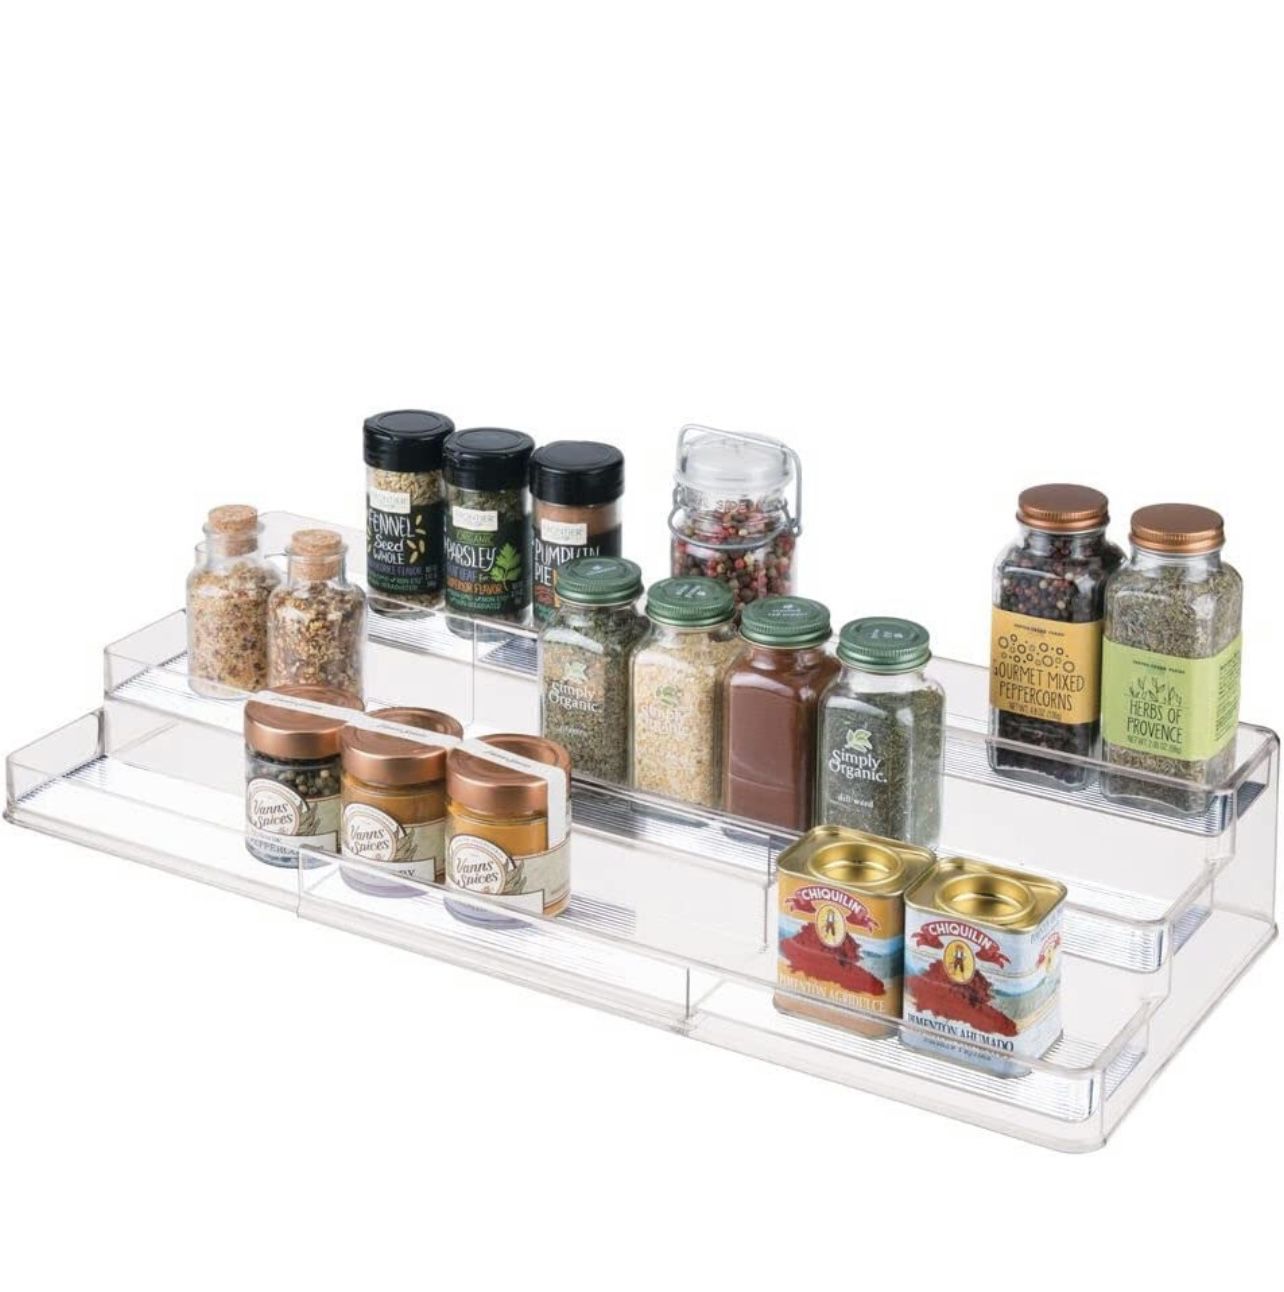 Design Plastic Shelf Adjustable & Expandable Spice Rack Organizer with 3 Tiers of Storage for Kitchen, Cabinet, Pantry Organization - Holds Spice Bott